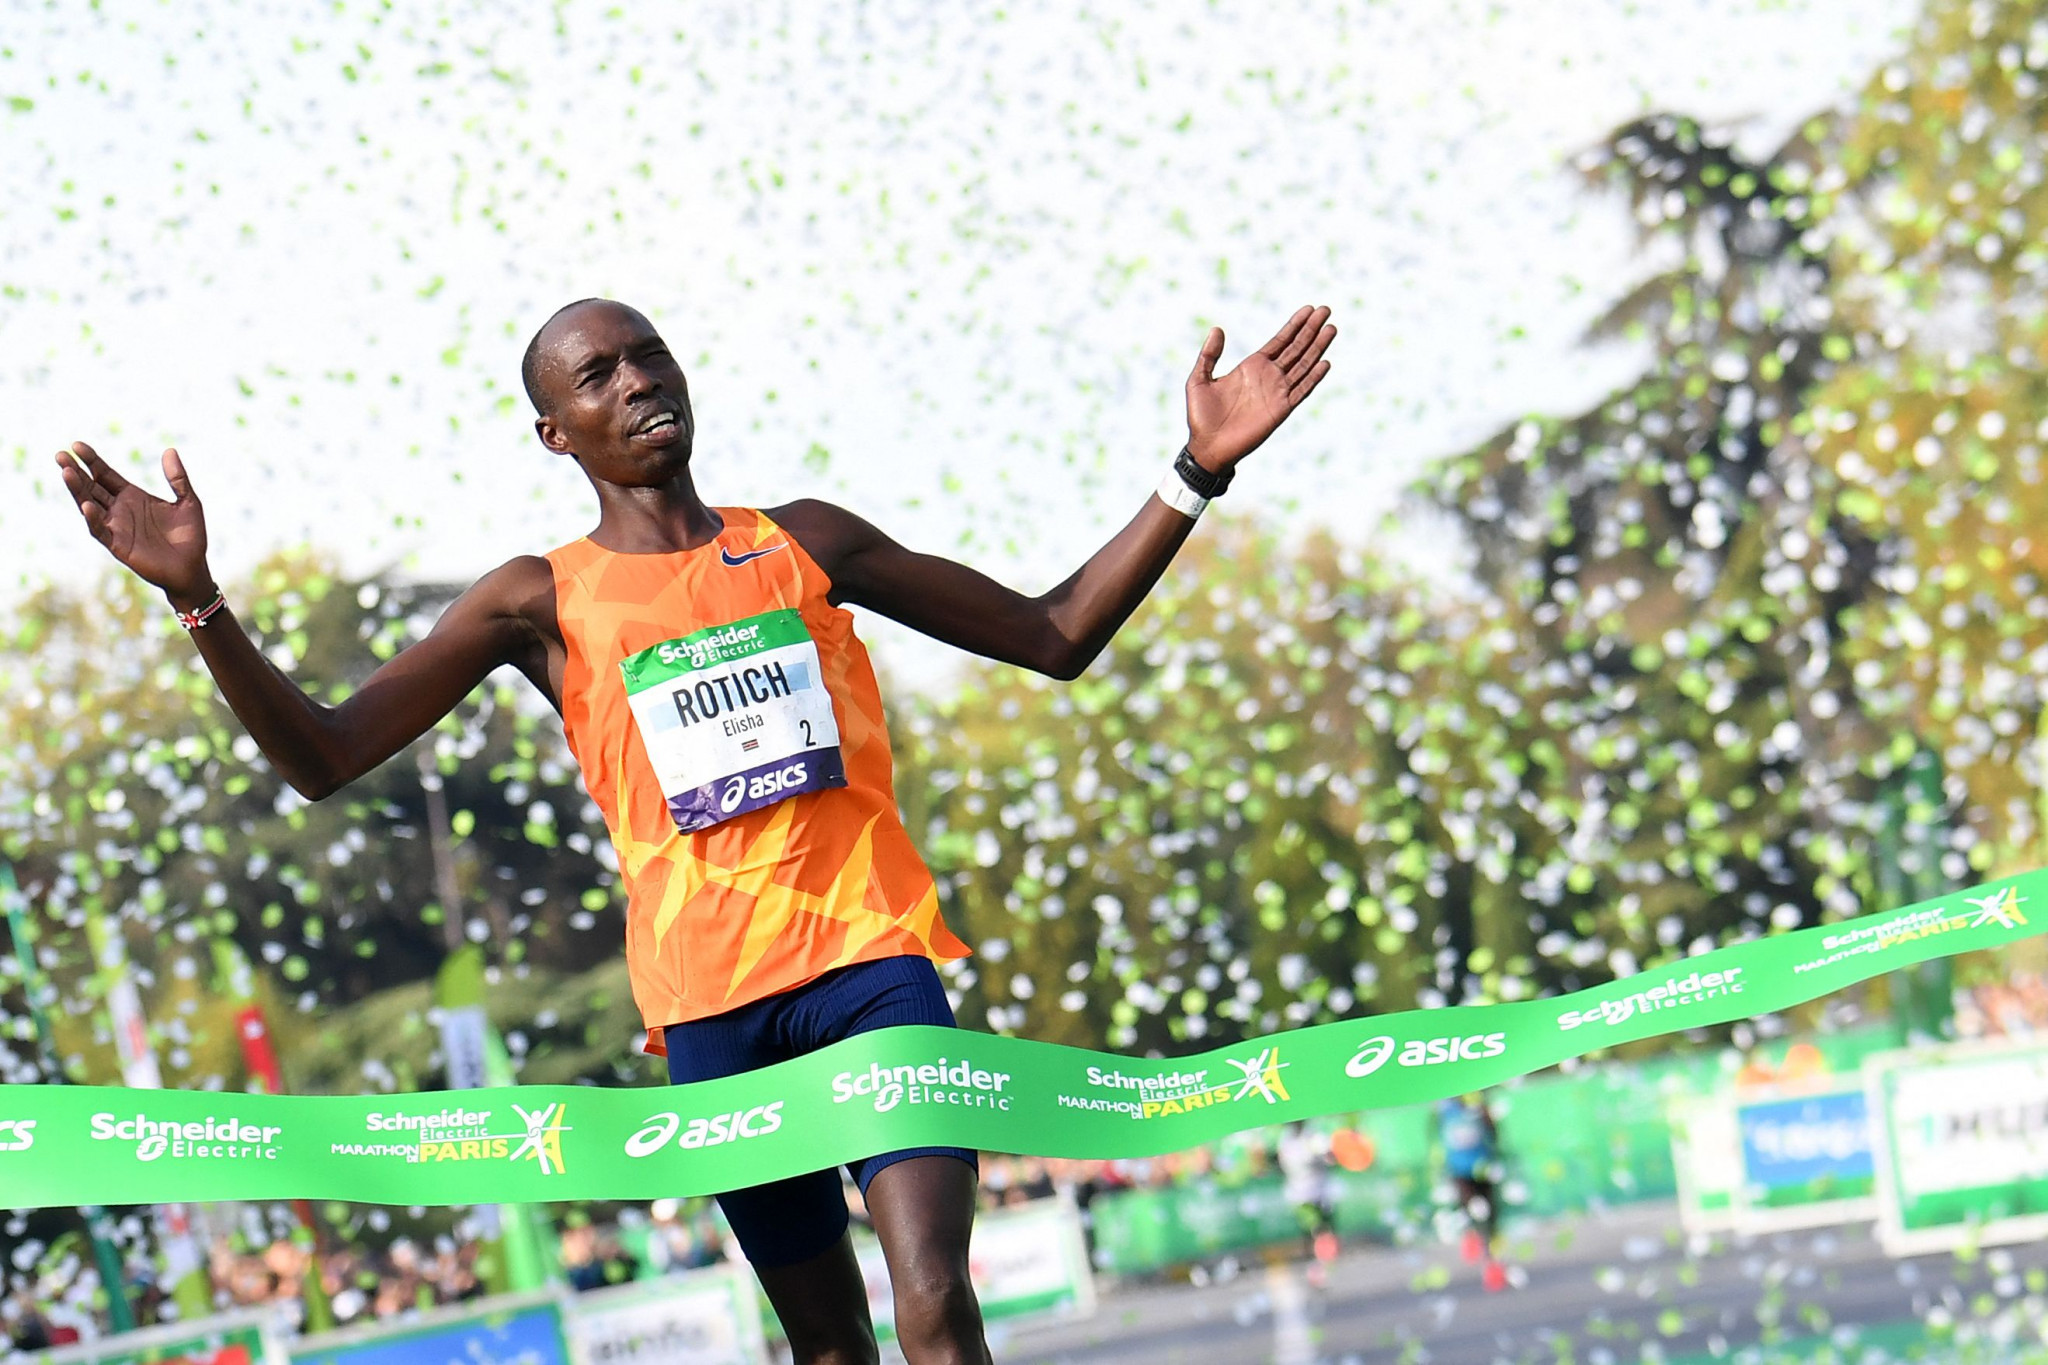 Elisha Rotich broke the Paris Marathon record by 43 seconds after finishing in 2:04:21 ©Getty Images